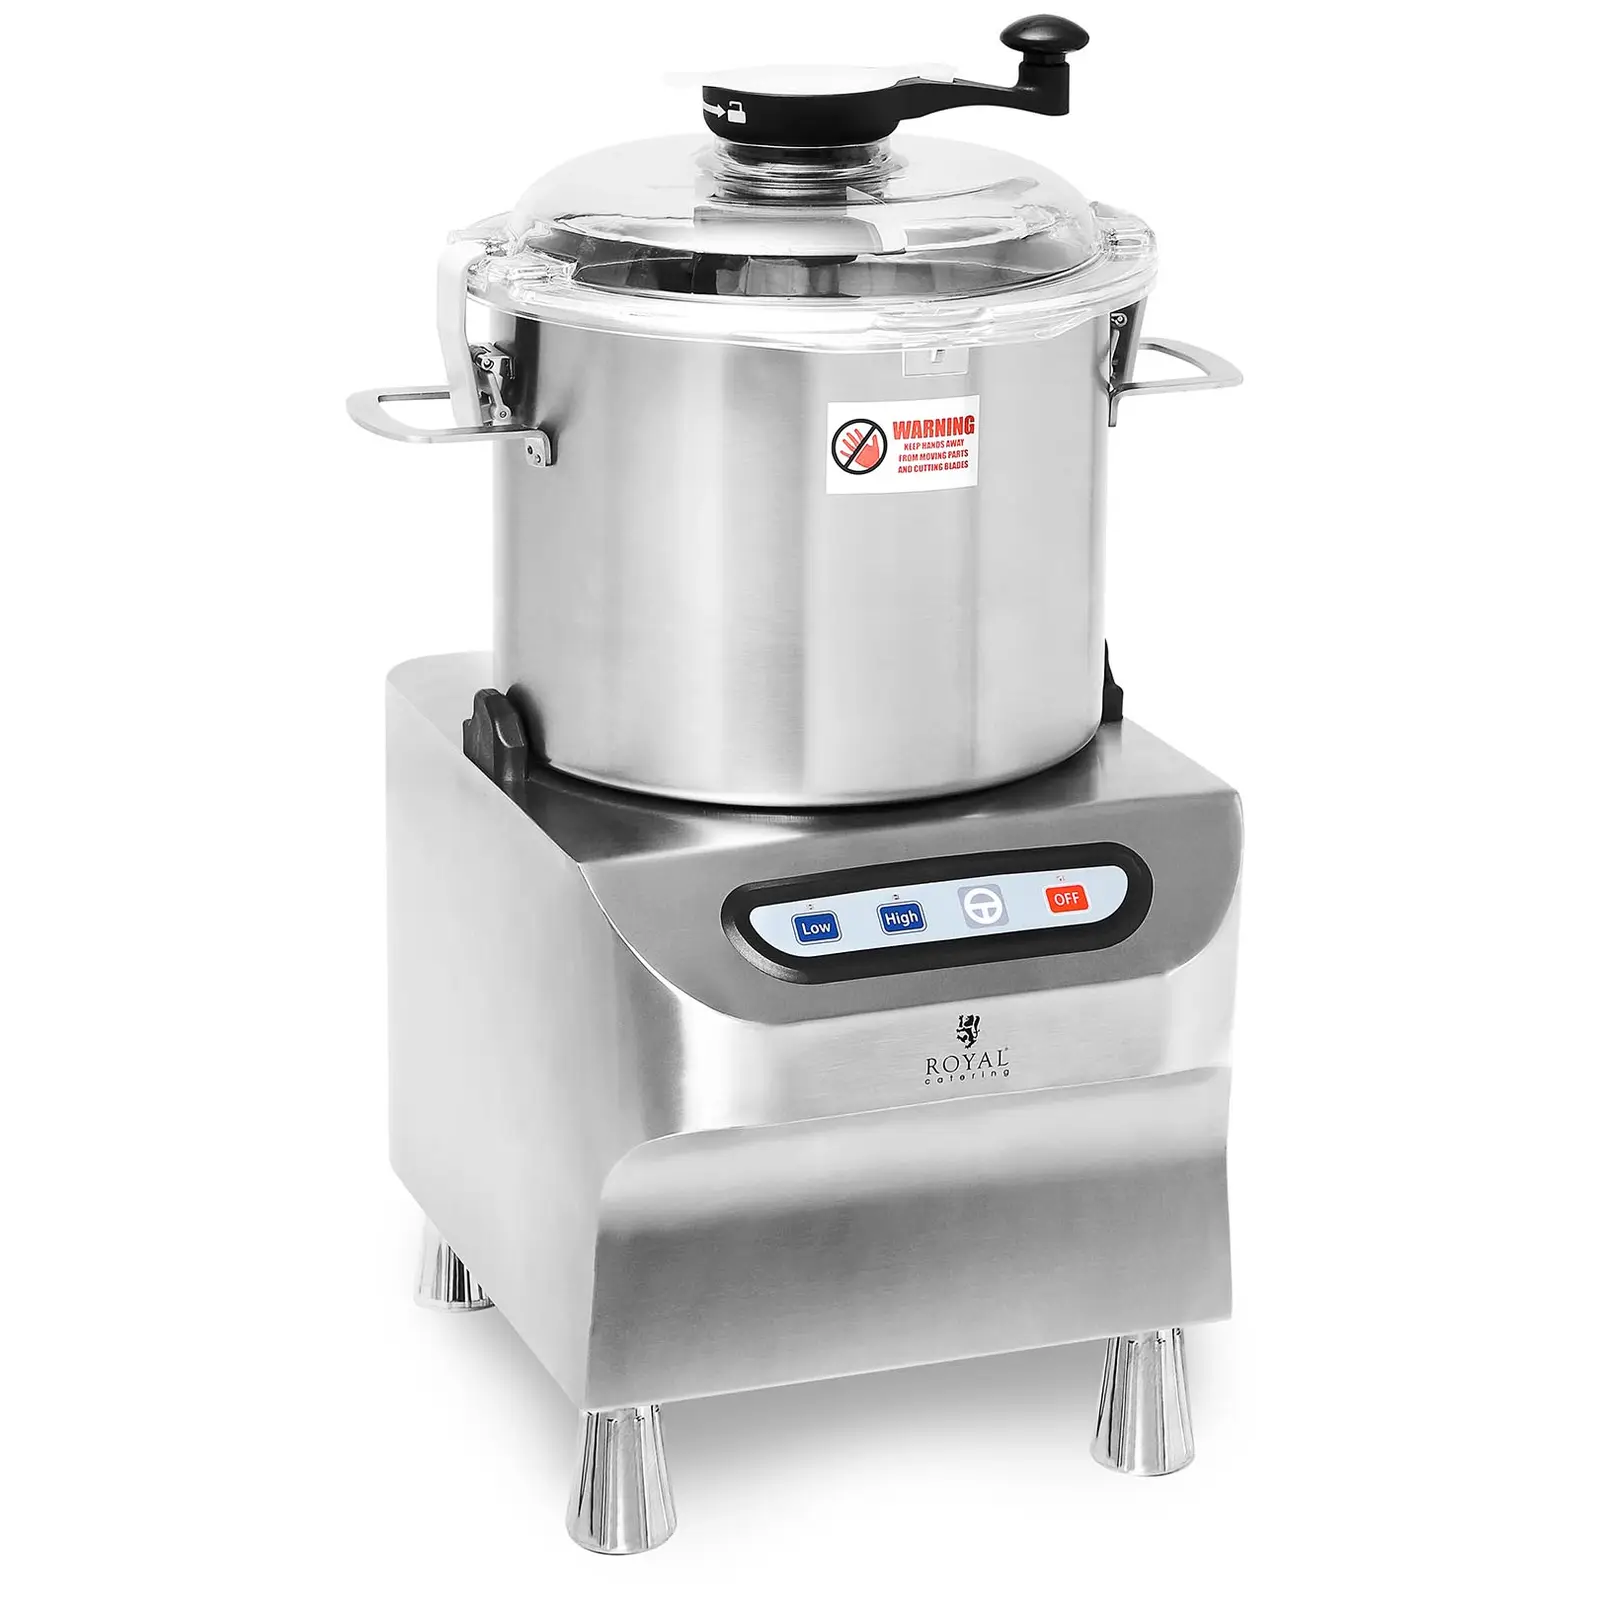 Smulkinimo dubuo - 1500/2200 aps./min. - „Royal Catering“ - 12 l